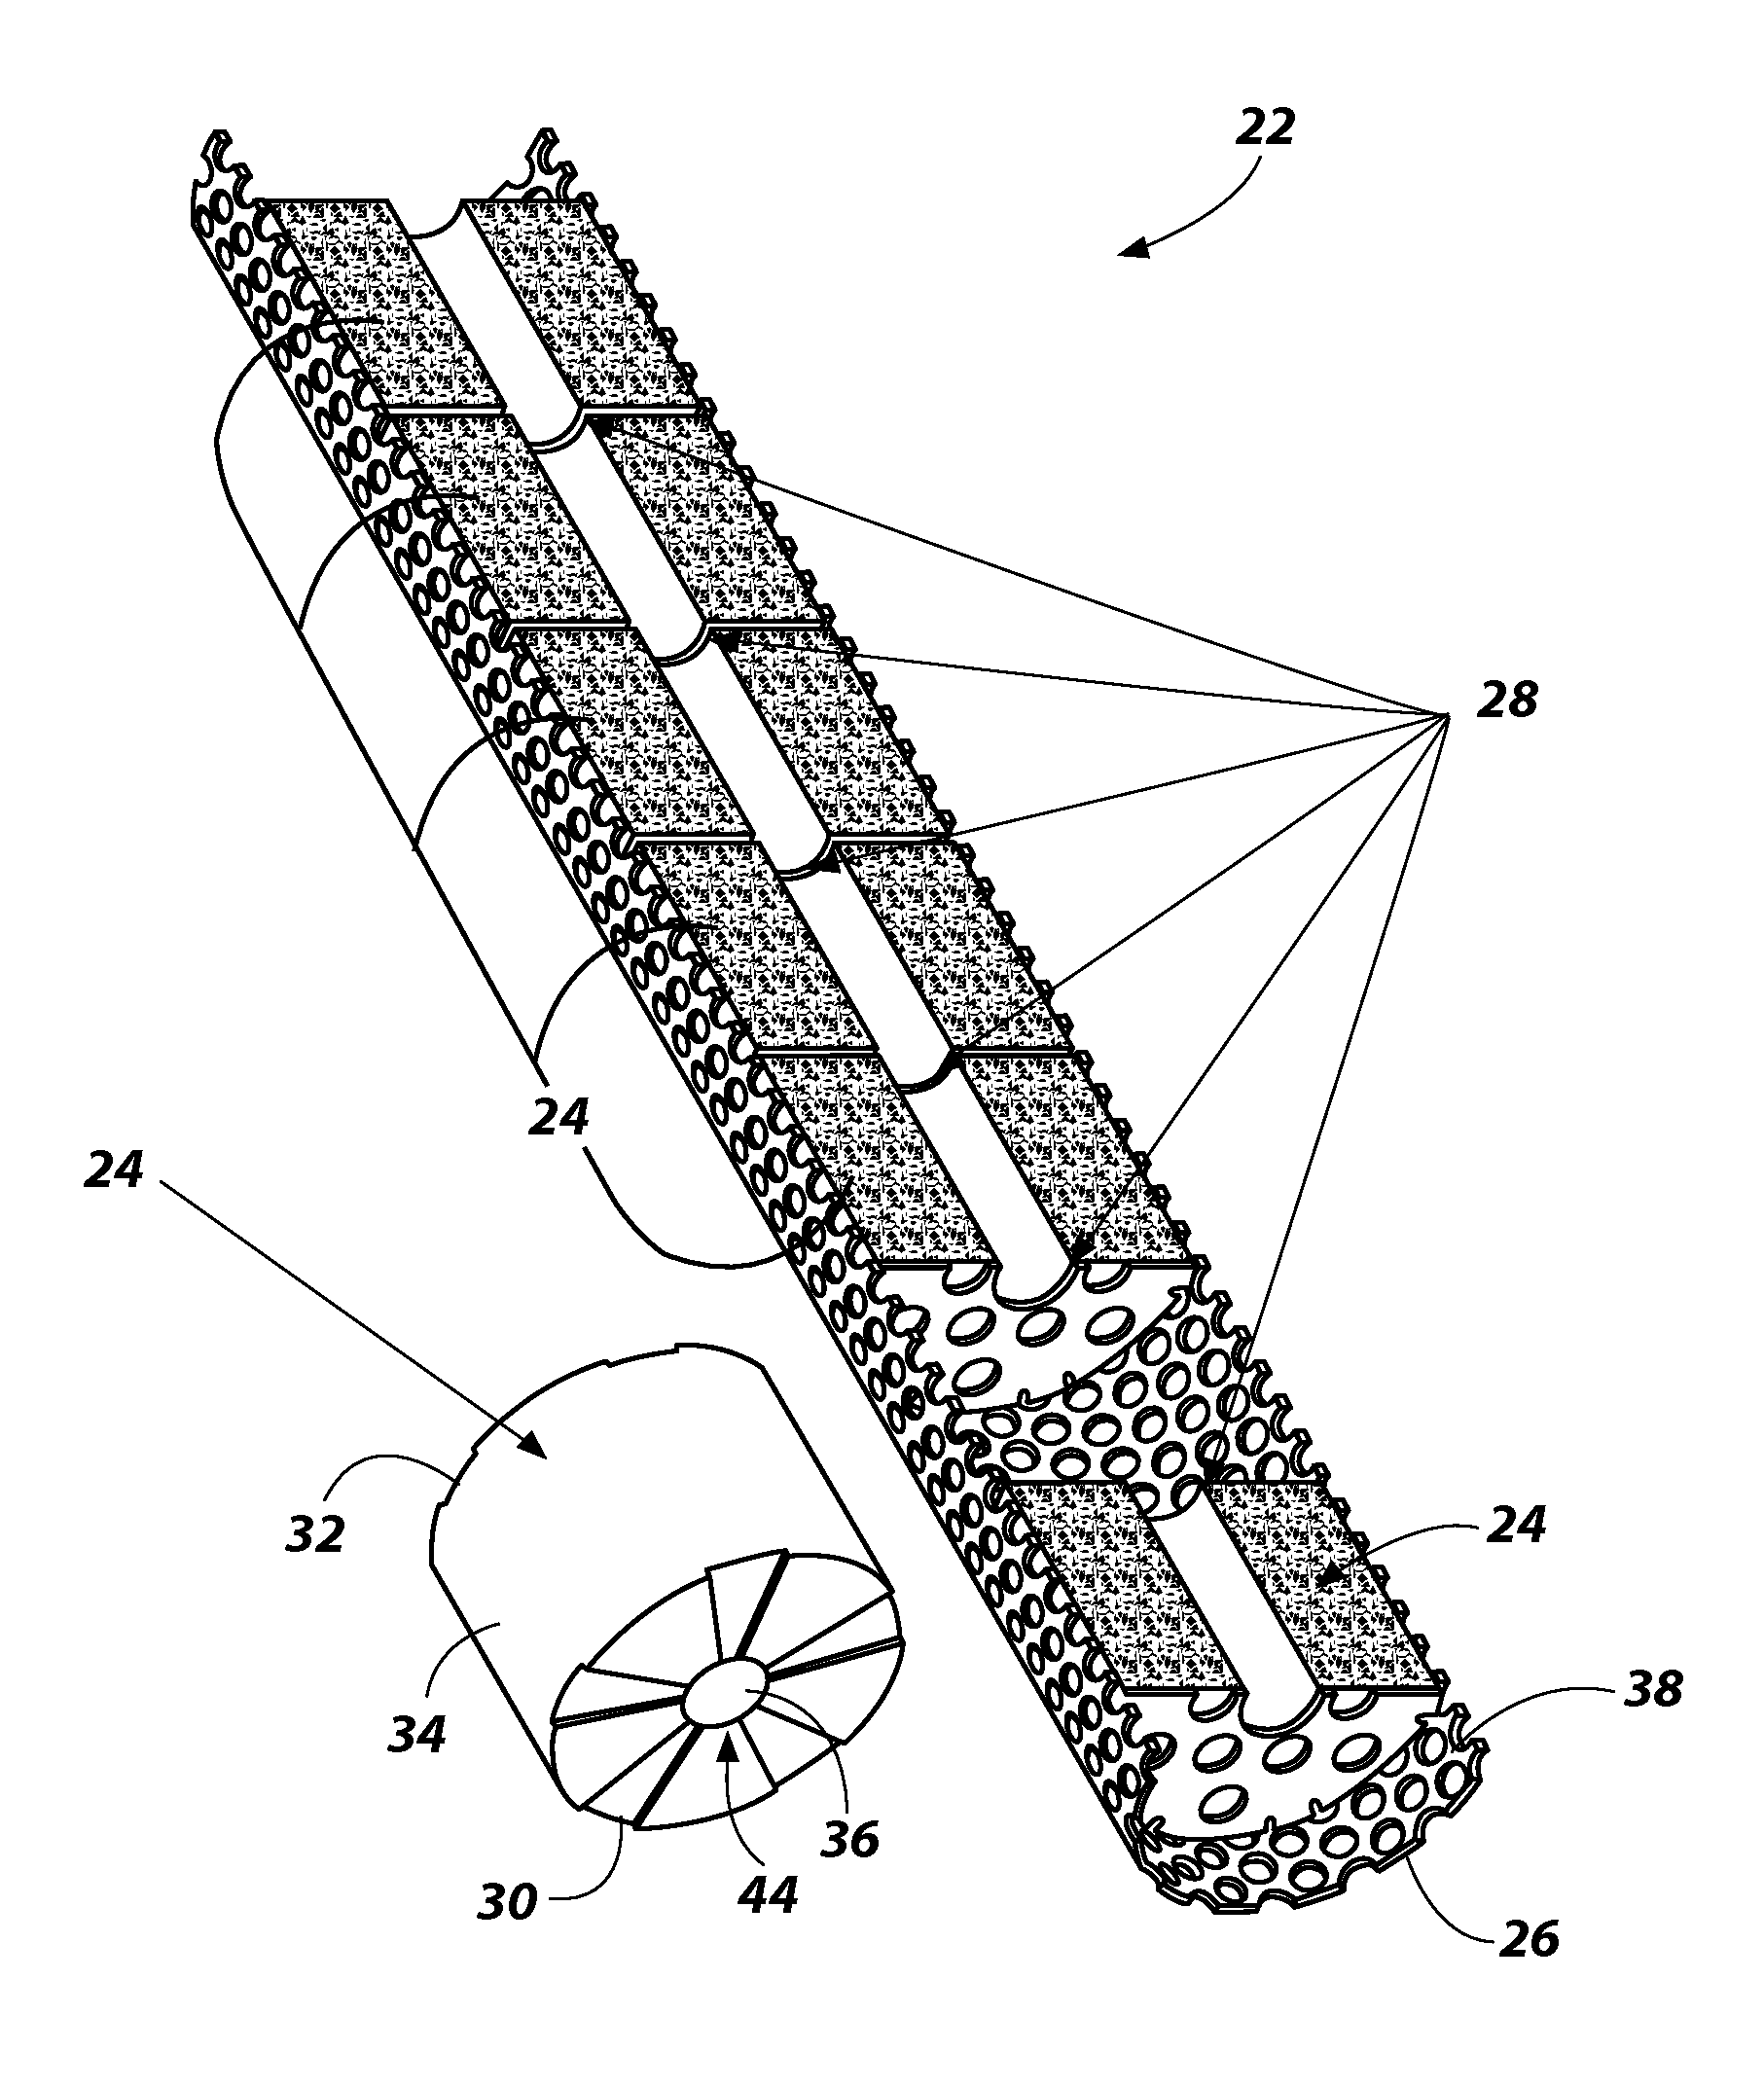 Gas-generating devices with grain-retention structures and related methods and systems